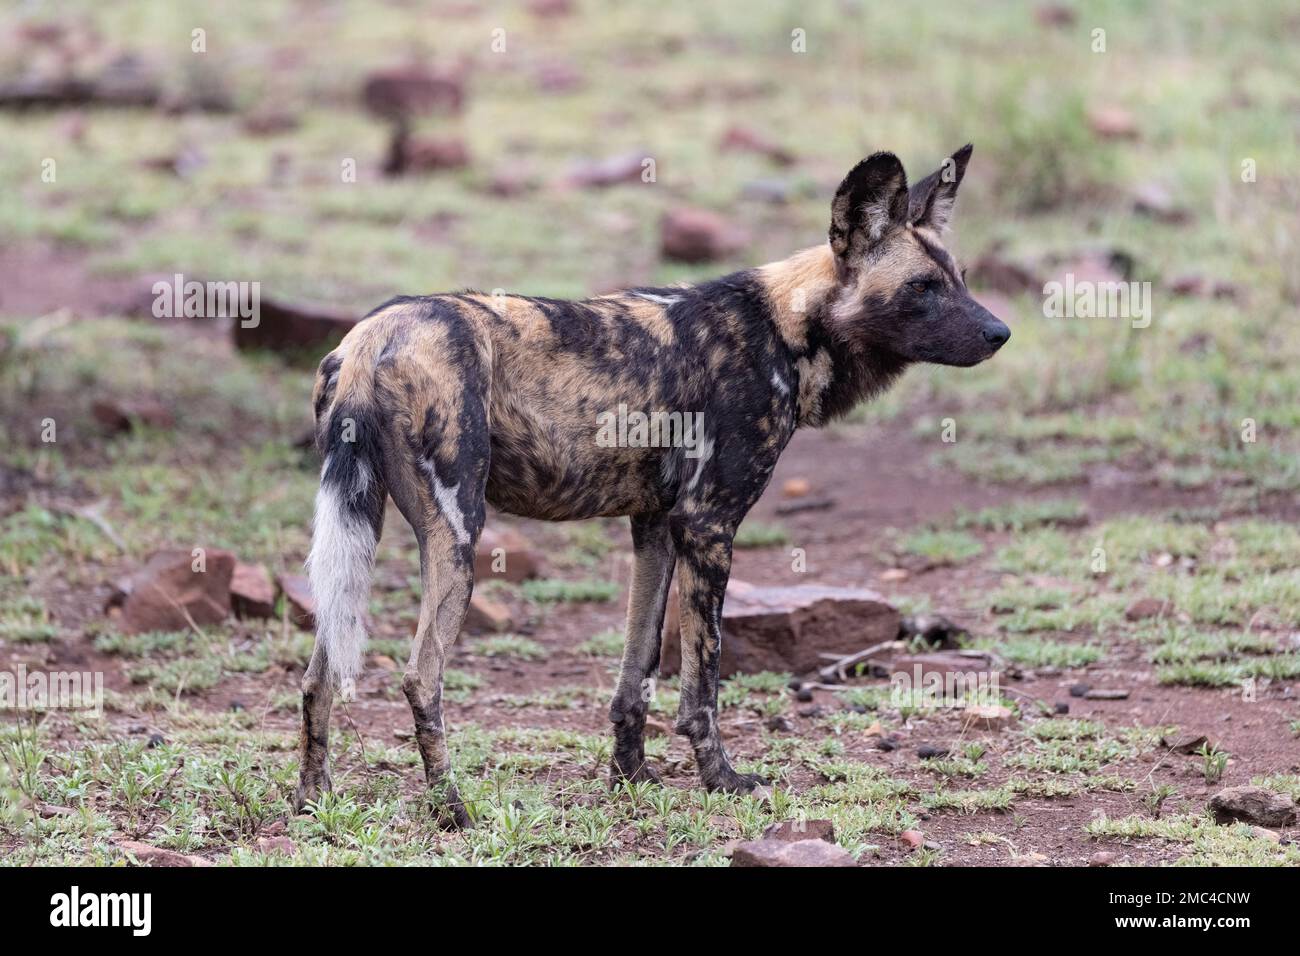 Close up side profile of a painted wild dog standing in the recently wet mud of the Kruger National Park, South Africa Stock Photo